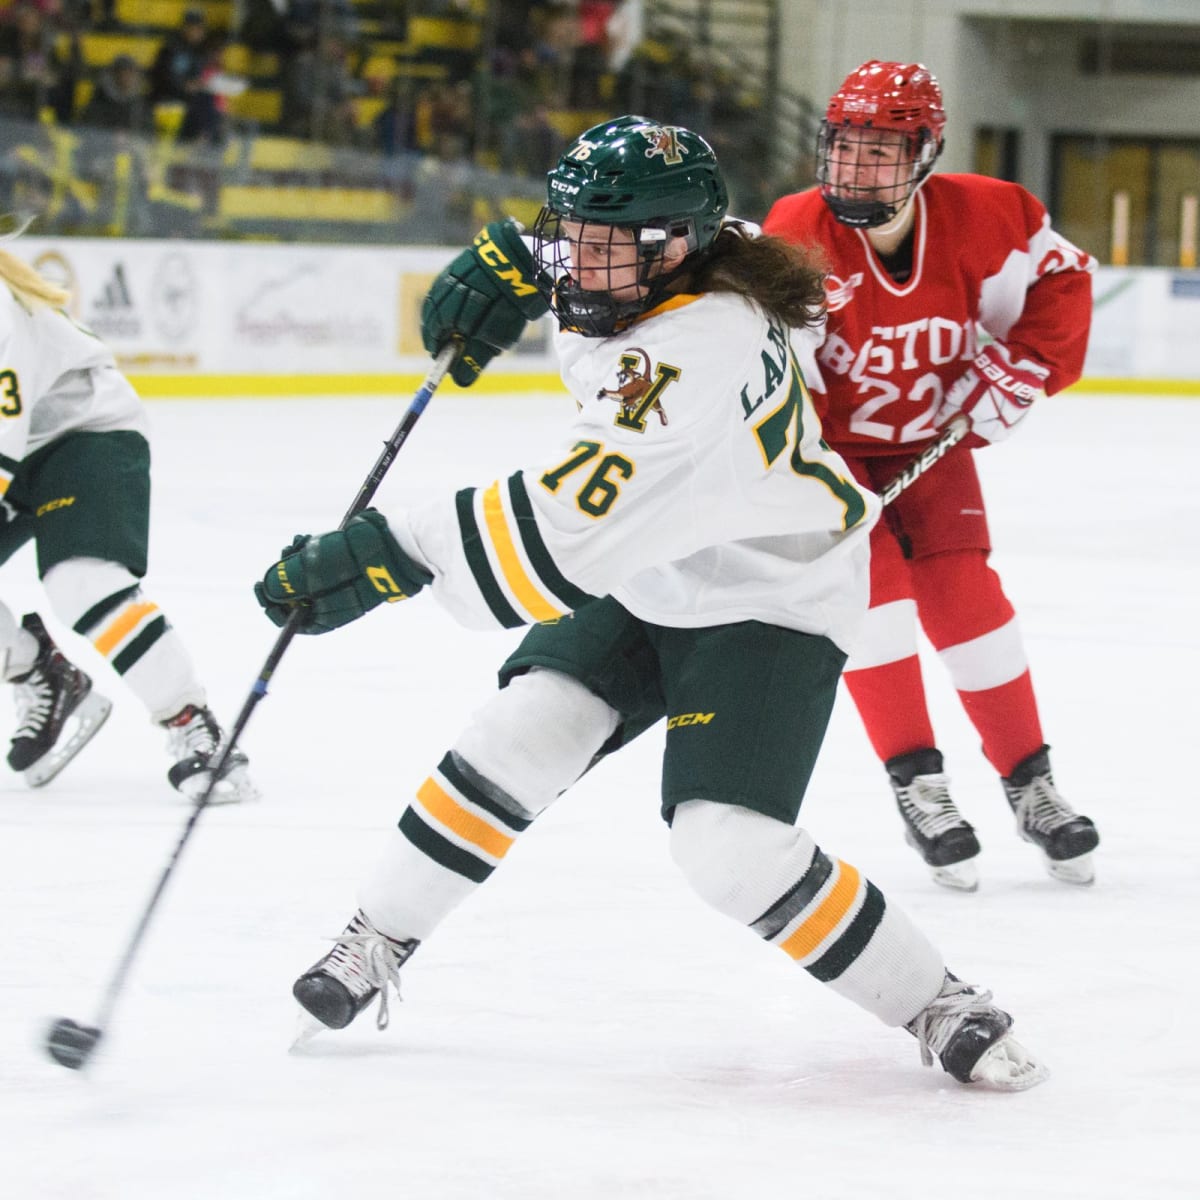 Minnesota State at Sacred Heart Live Stream Womens Hockey - How to Watch and Stream Major League and College Sports